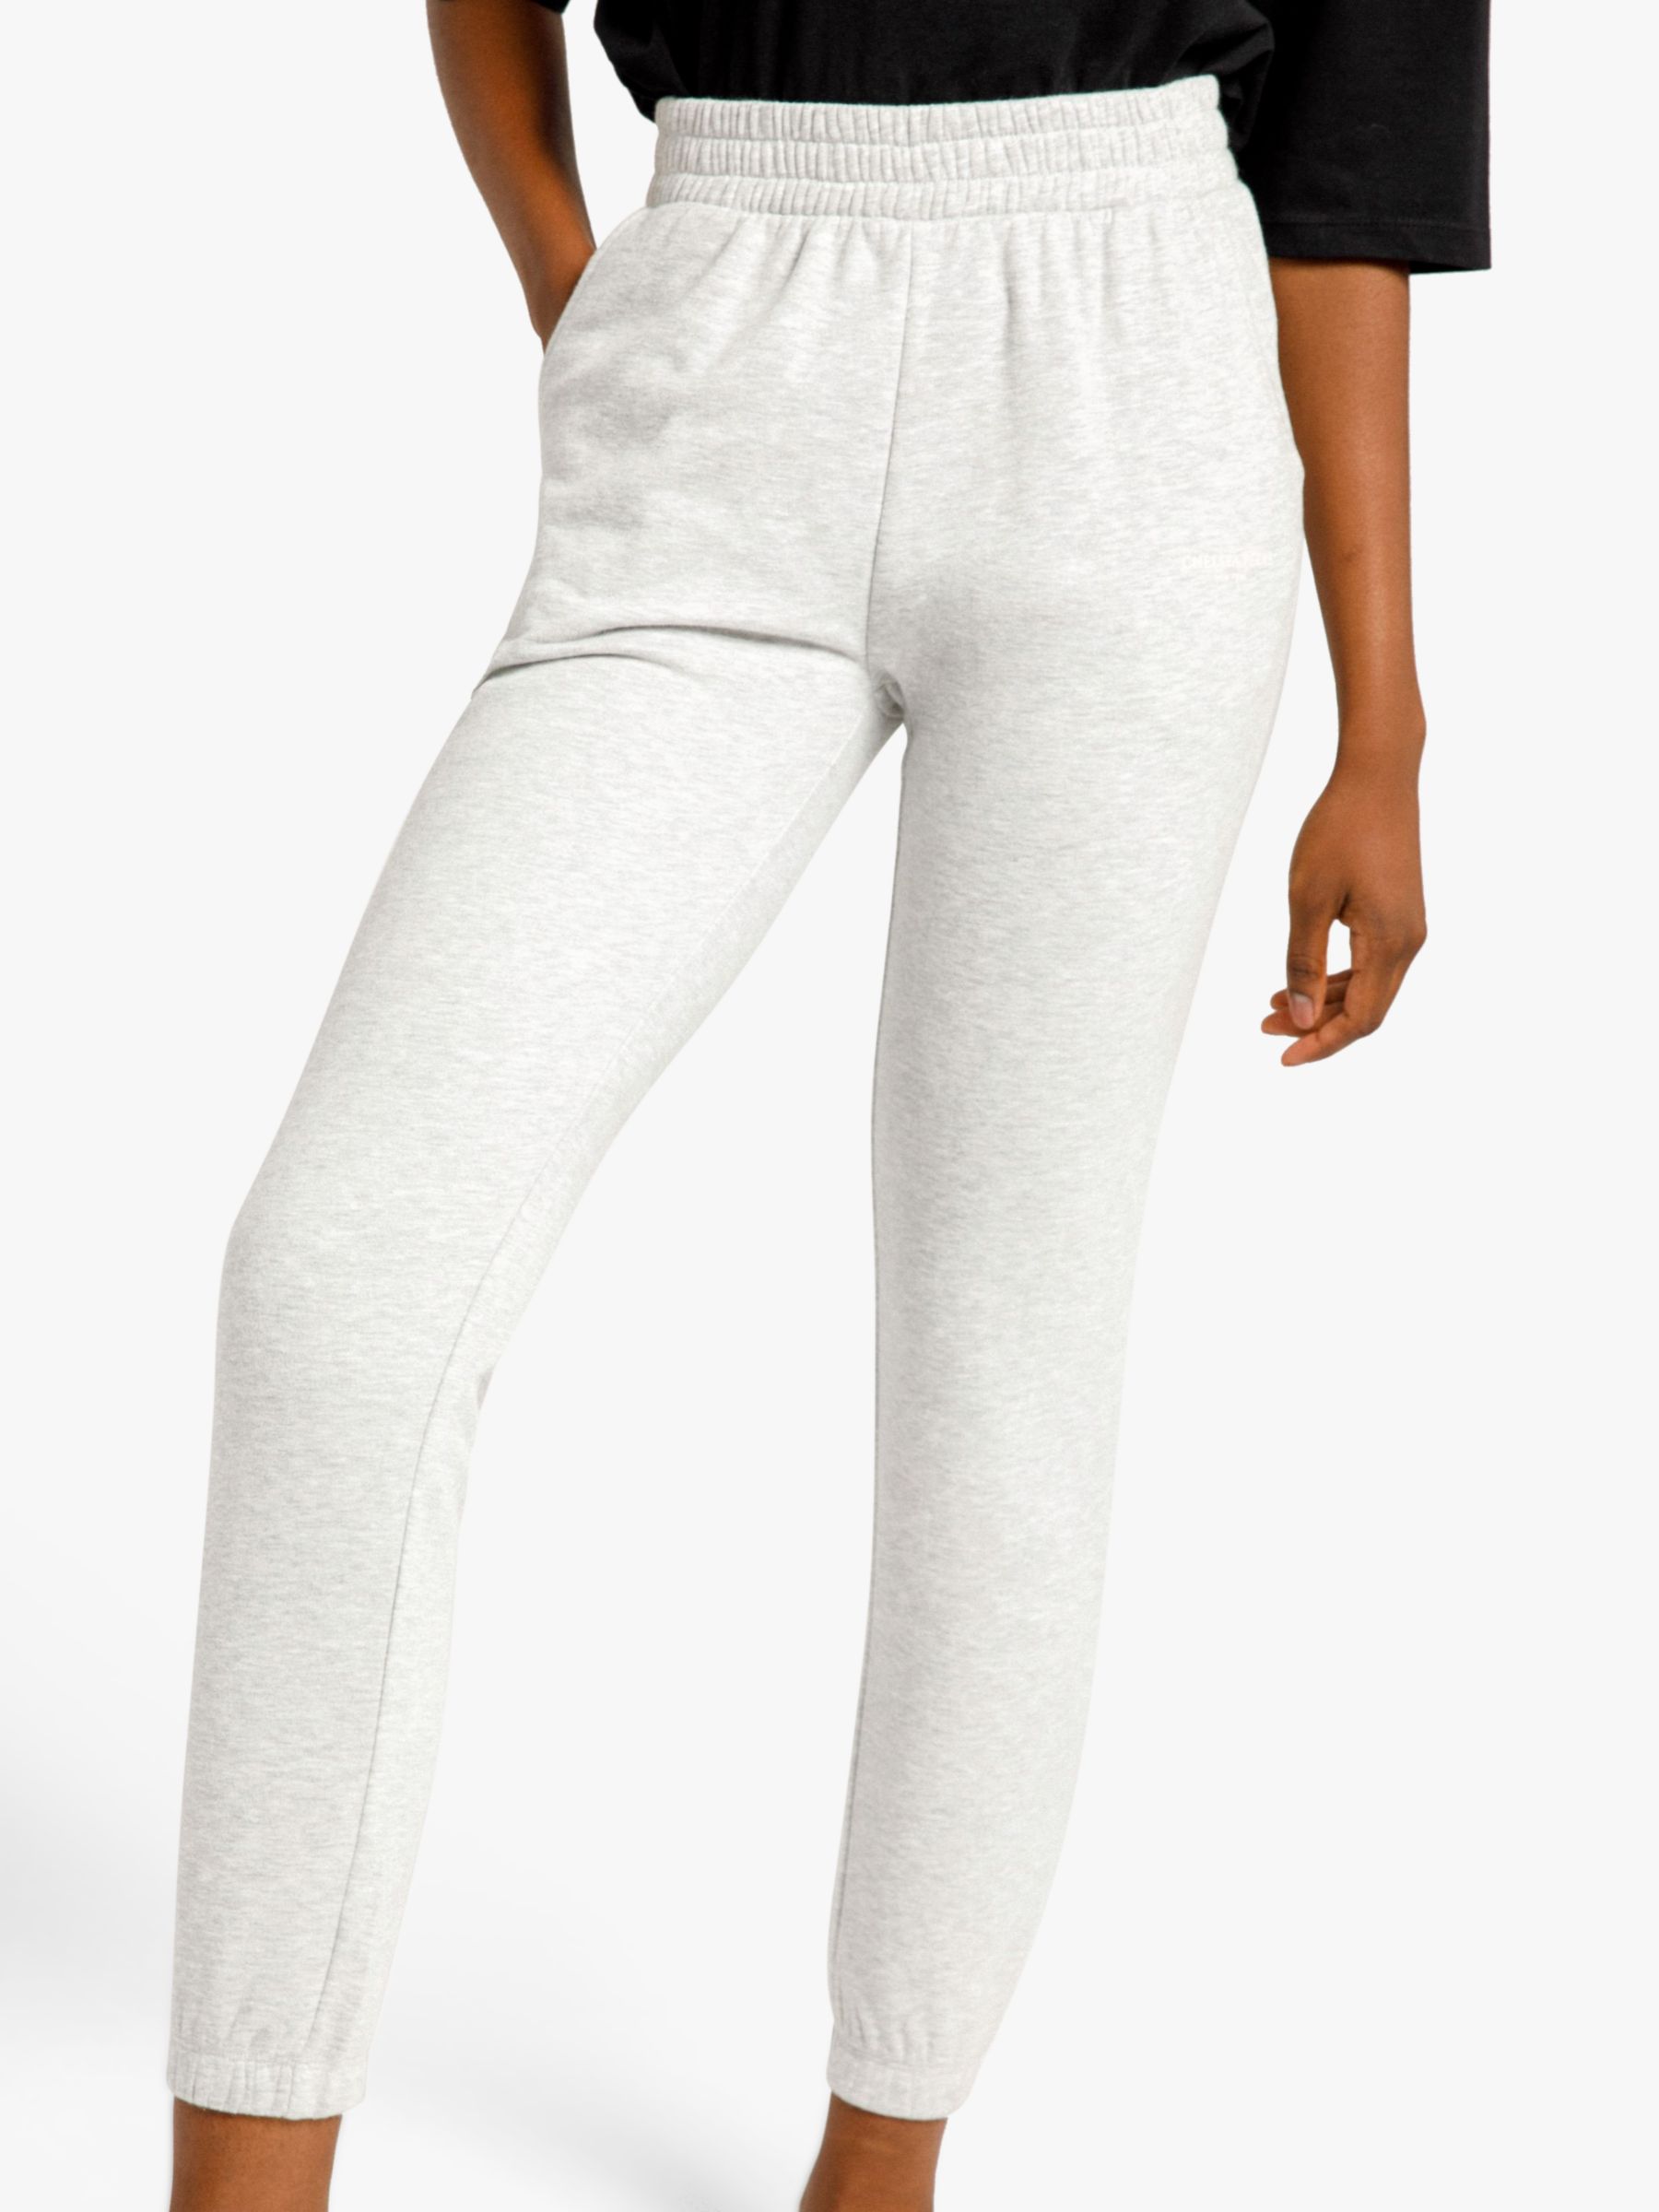 Chelsea Peers Organic Cotton Blend Tapered Cuff Lounge Joggers